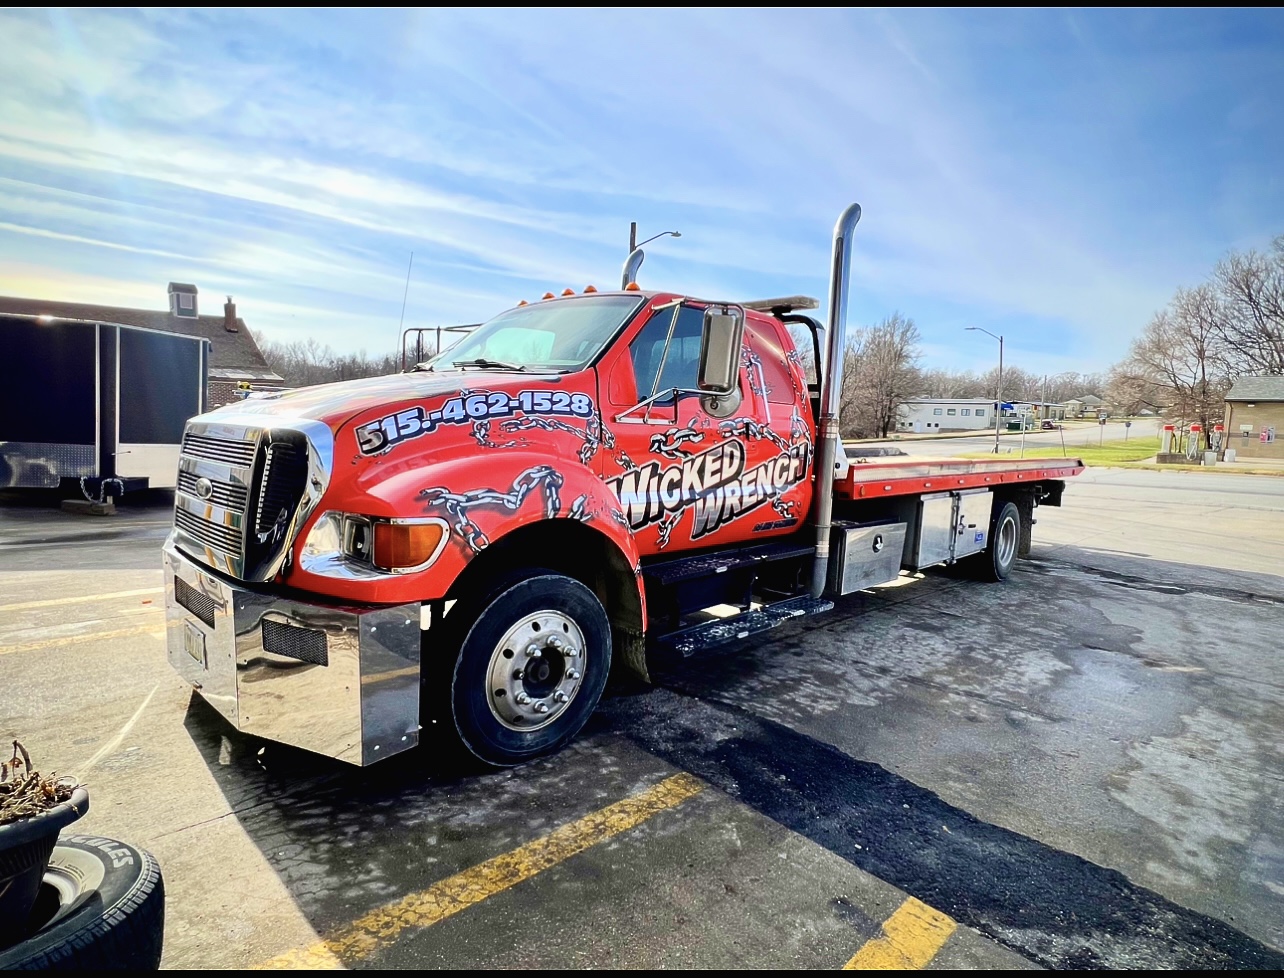 Wicked Wrench 24hr Towing & Recovery LLC.